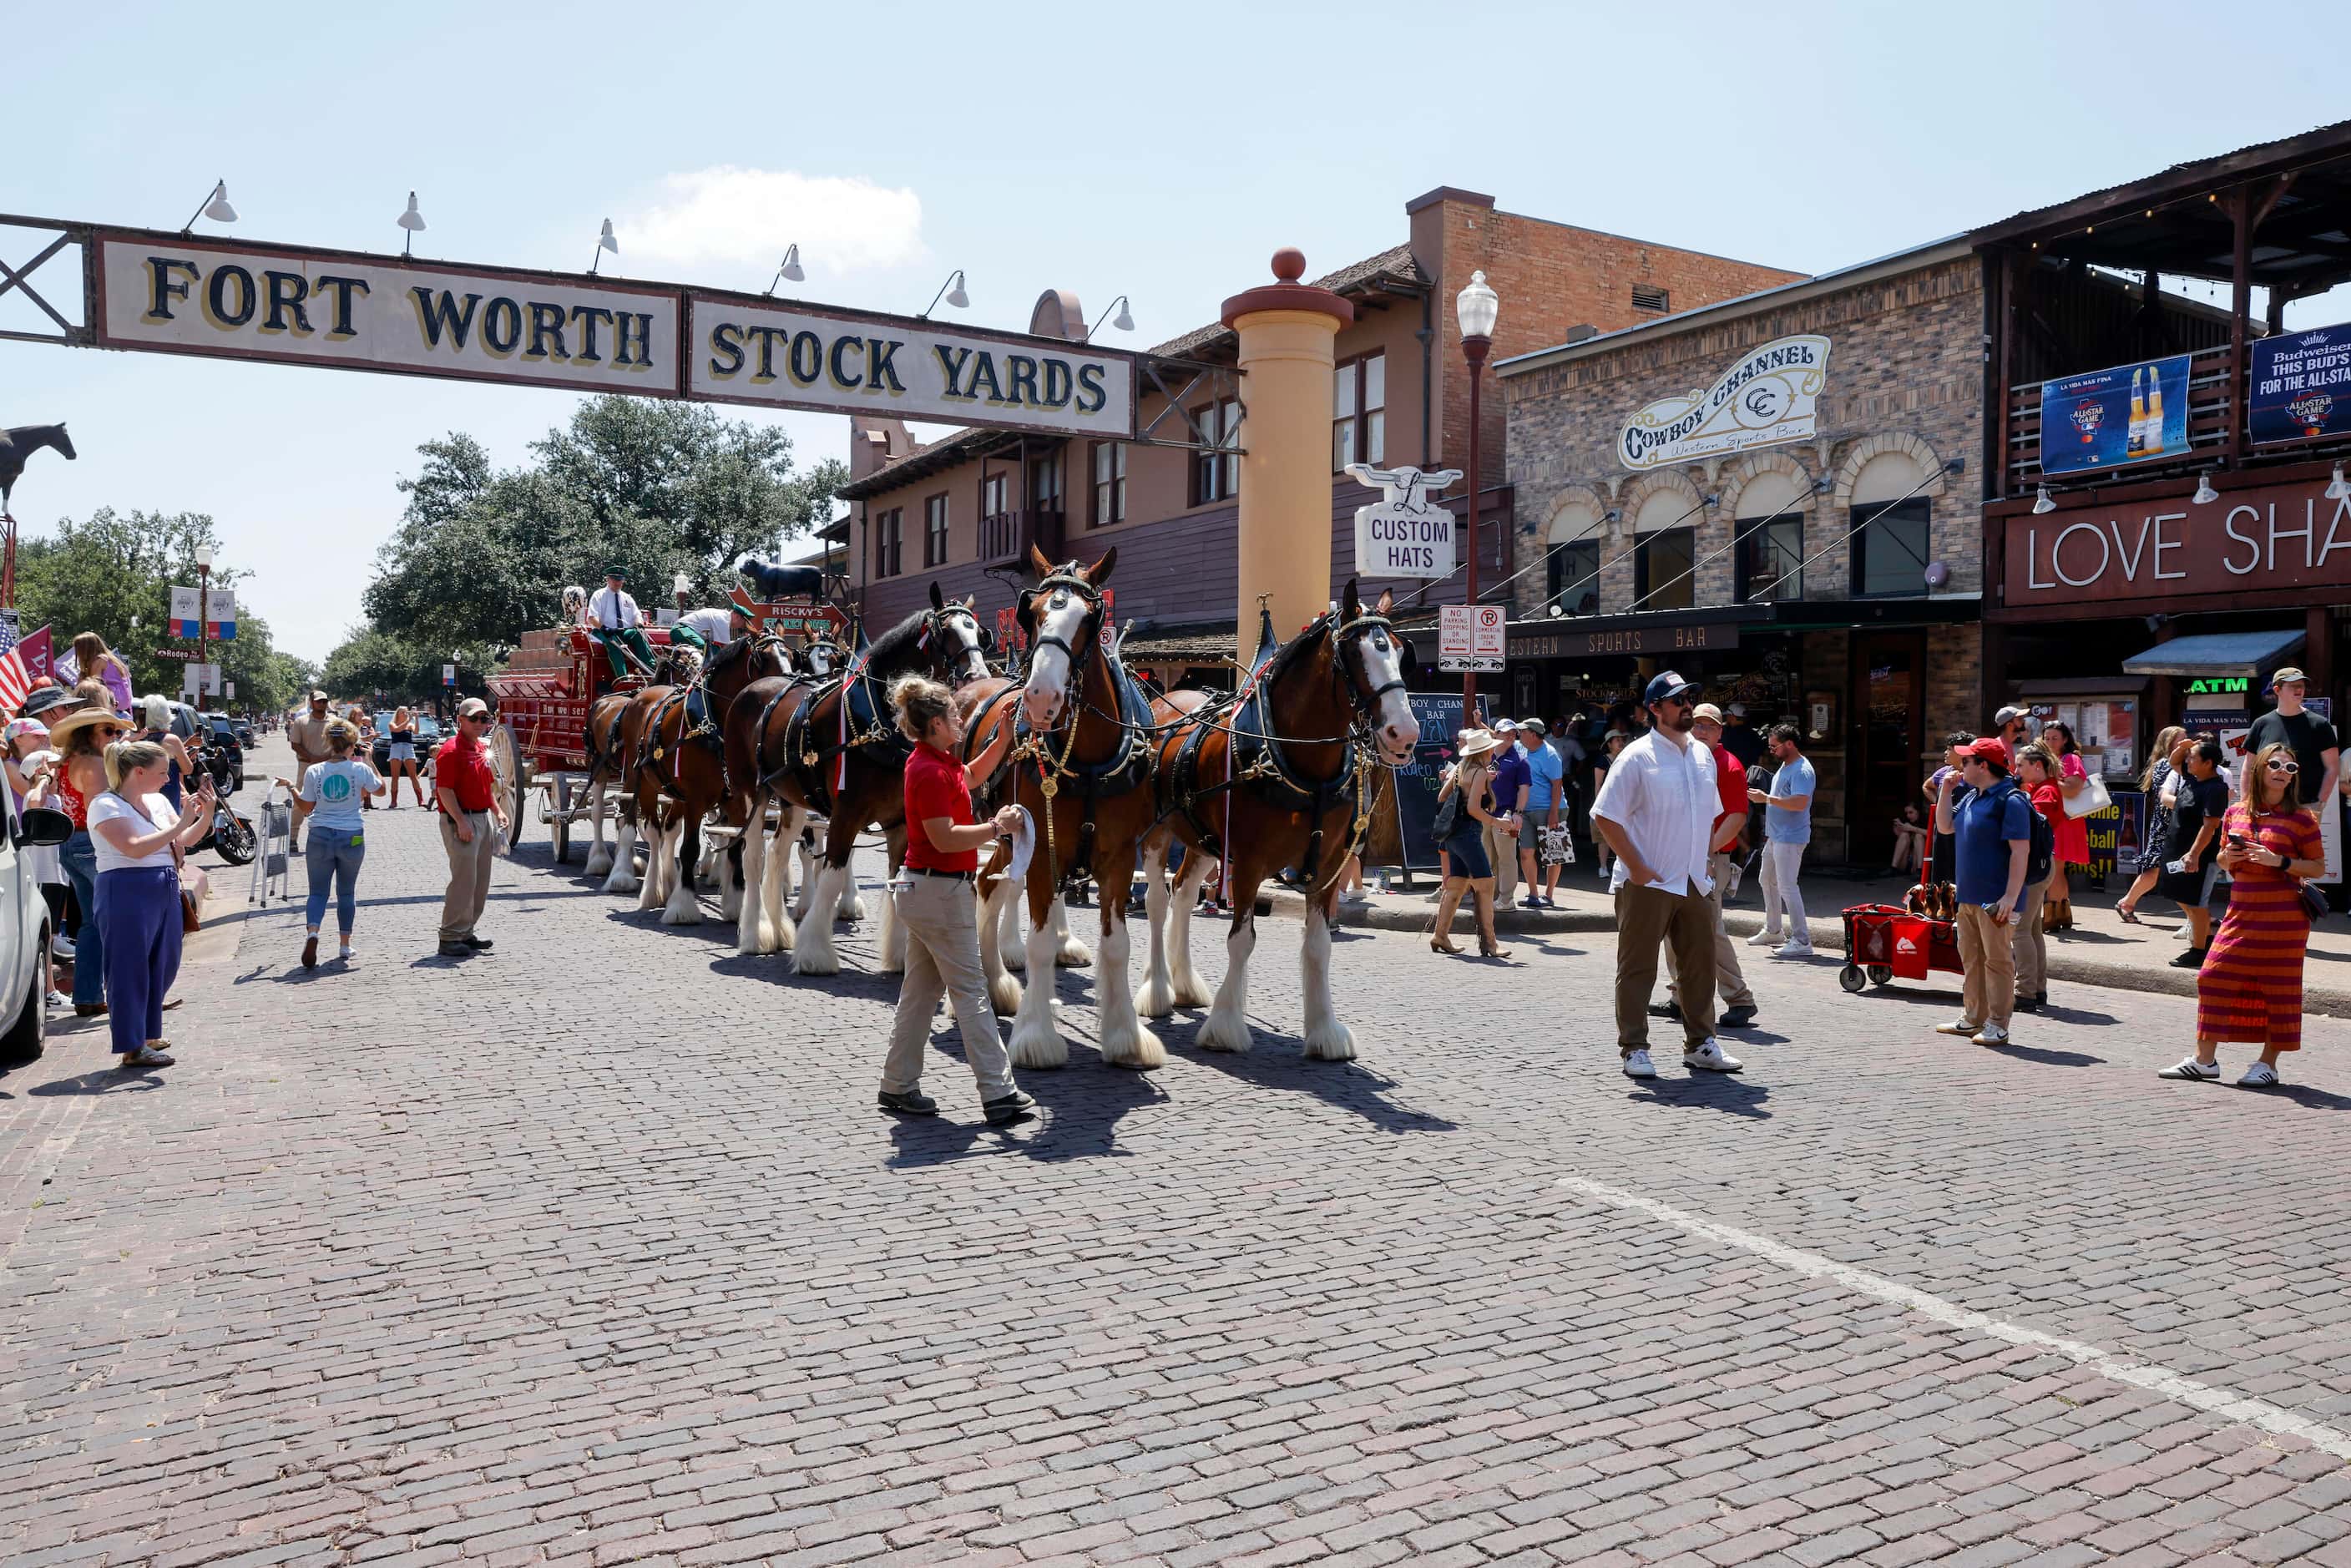 People gather along East Exchange in The Stockyards to see the Budweiser Clydesdales,...